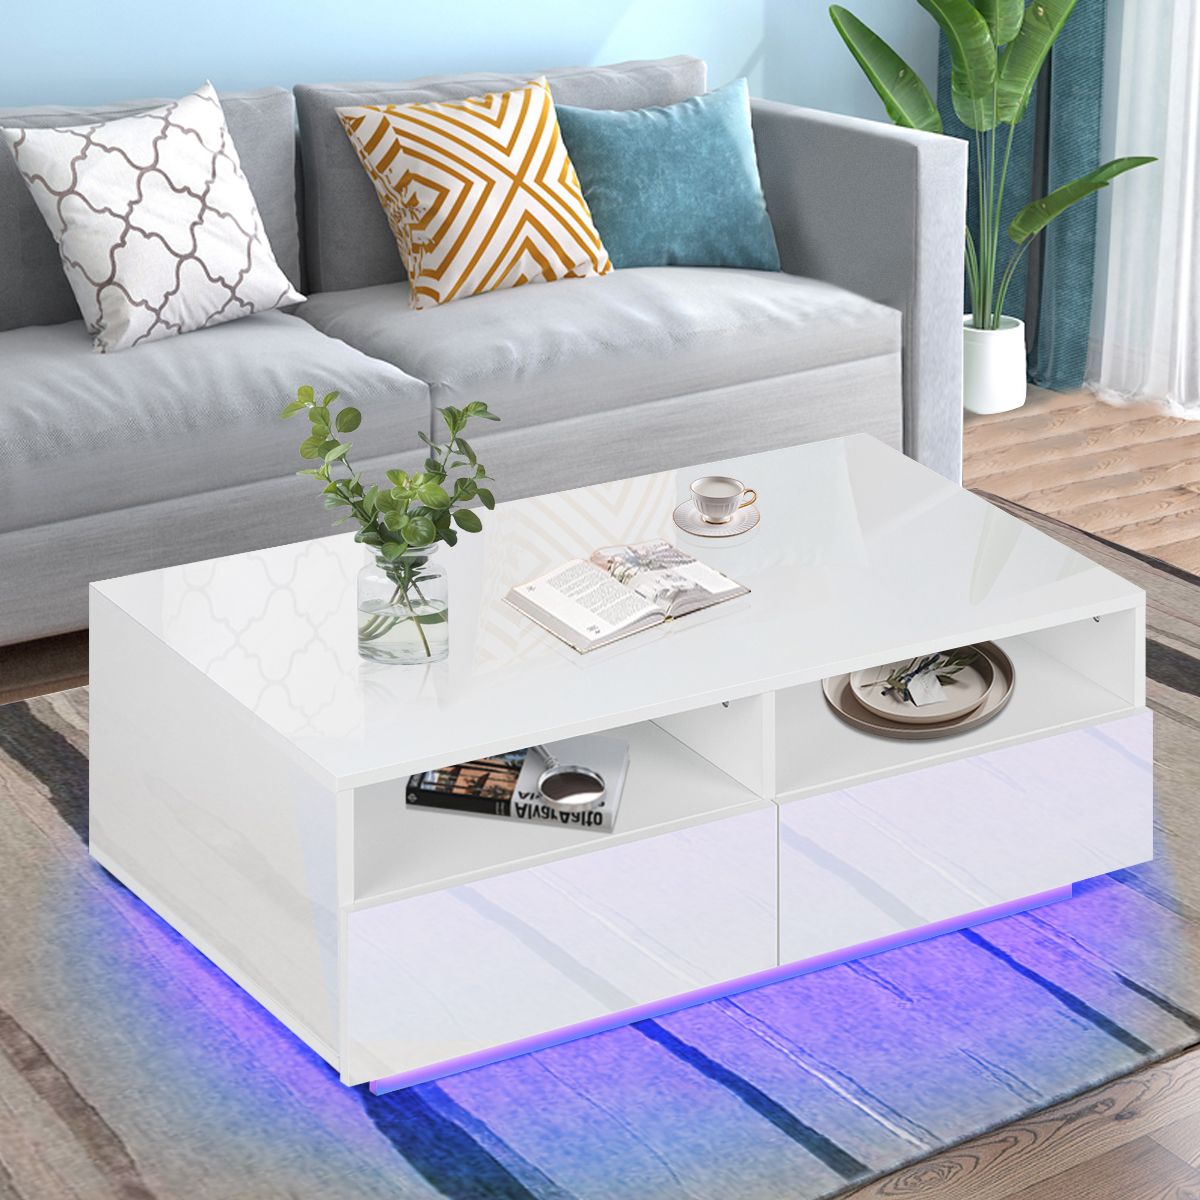 Hommpa High Gloss Led Coffee Table W/ 4 Drawers Living Room With Remote Throughout Led Coffee Tables With 4 Drawers (View 9 of 15)